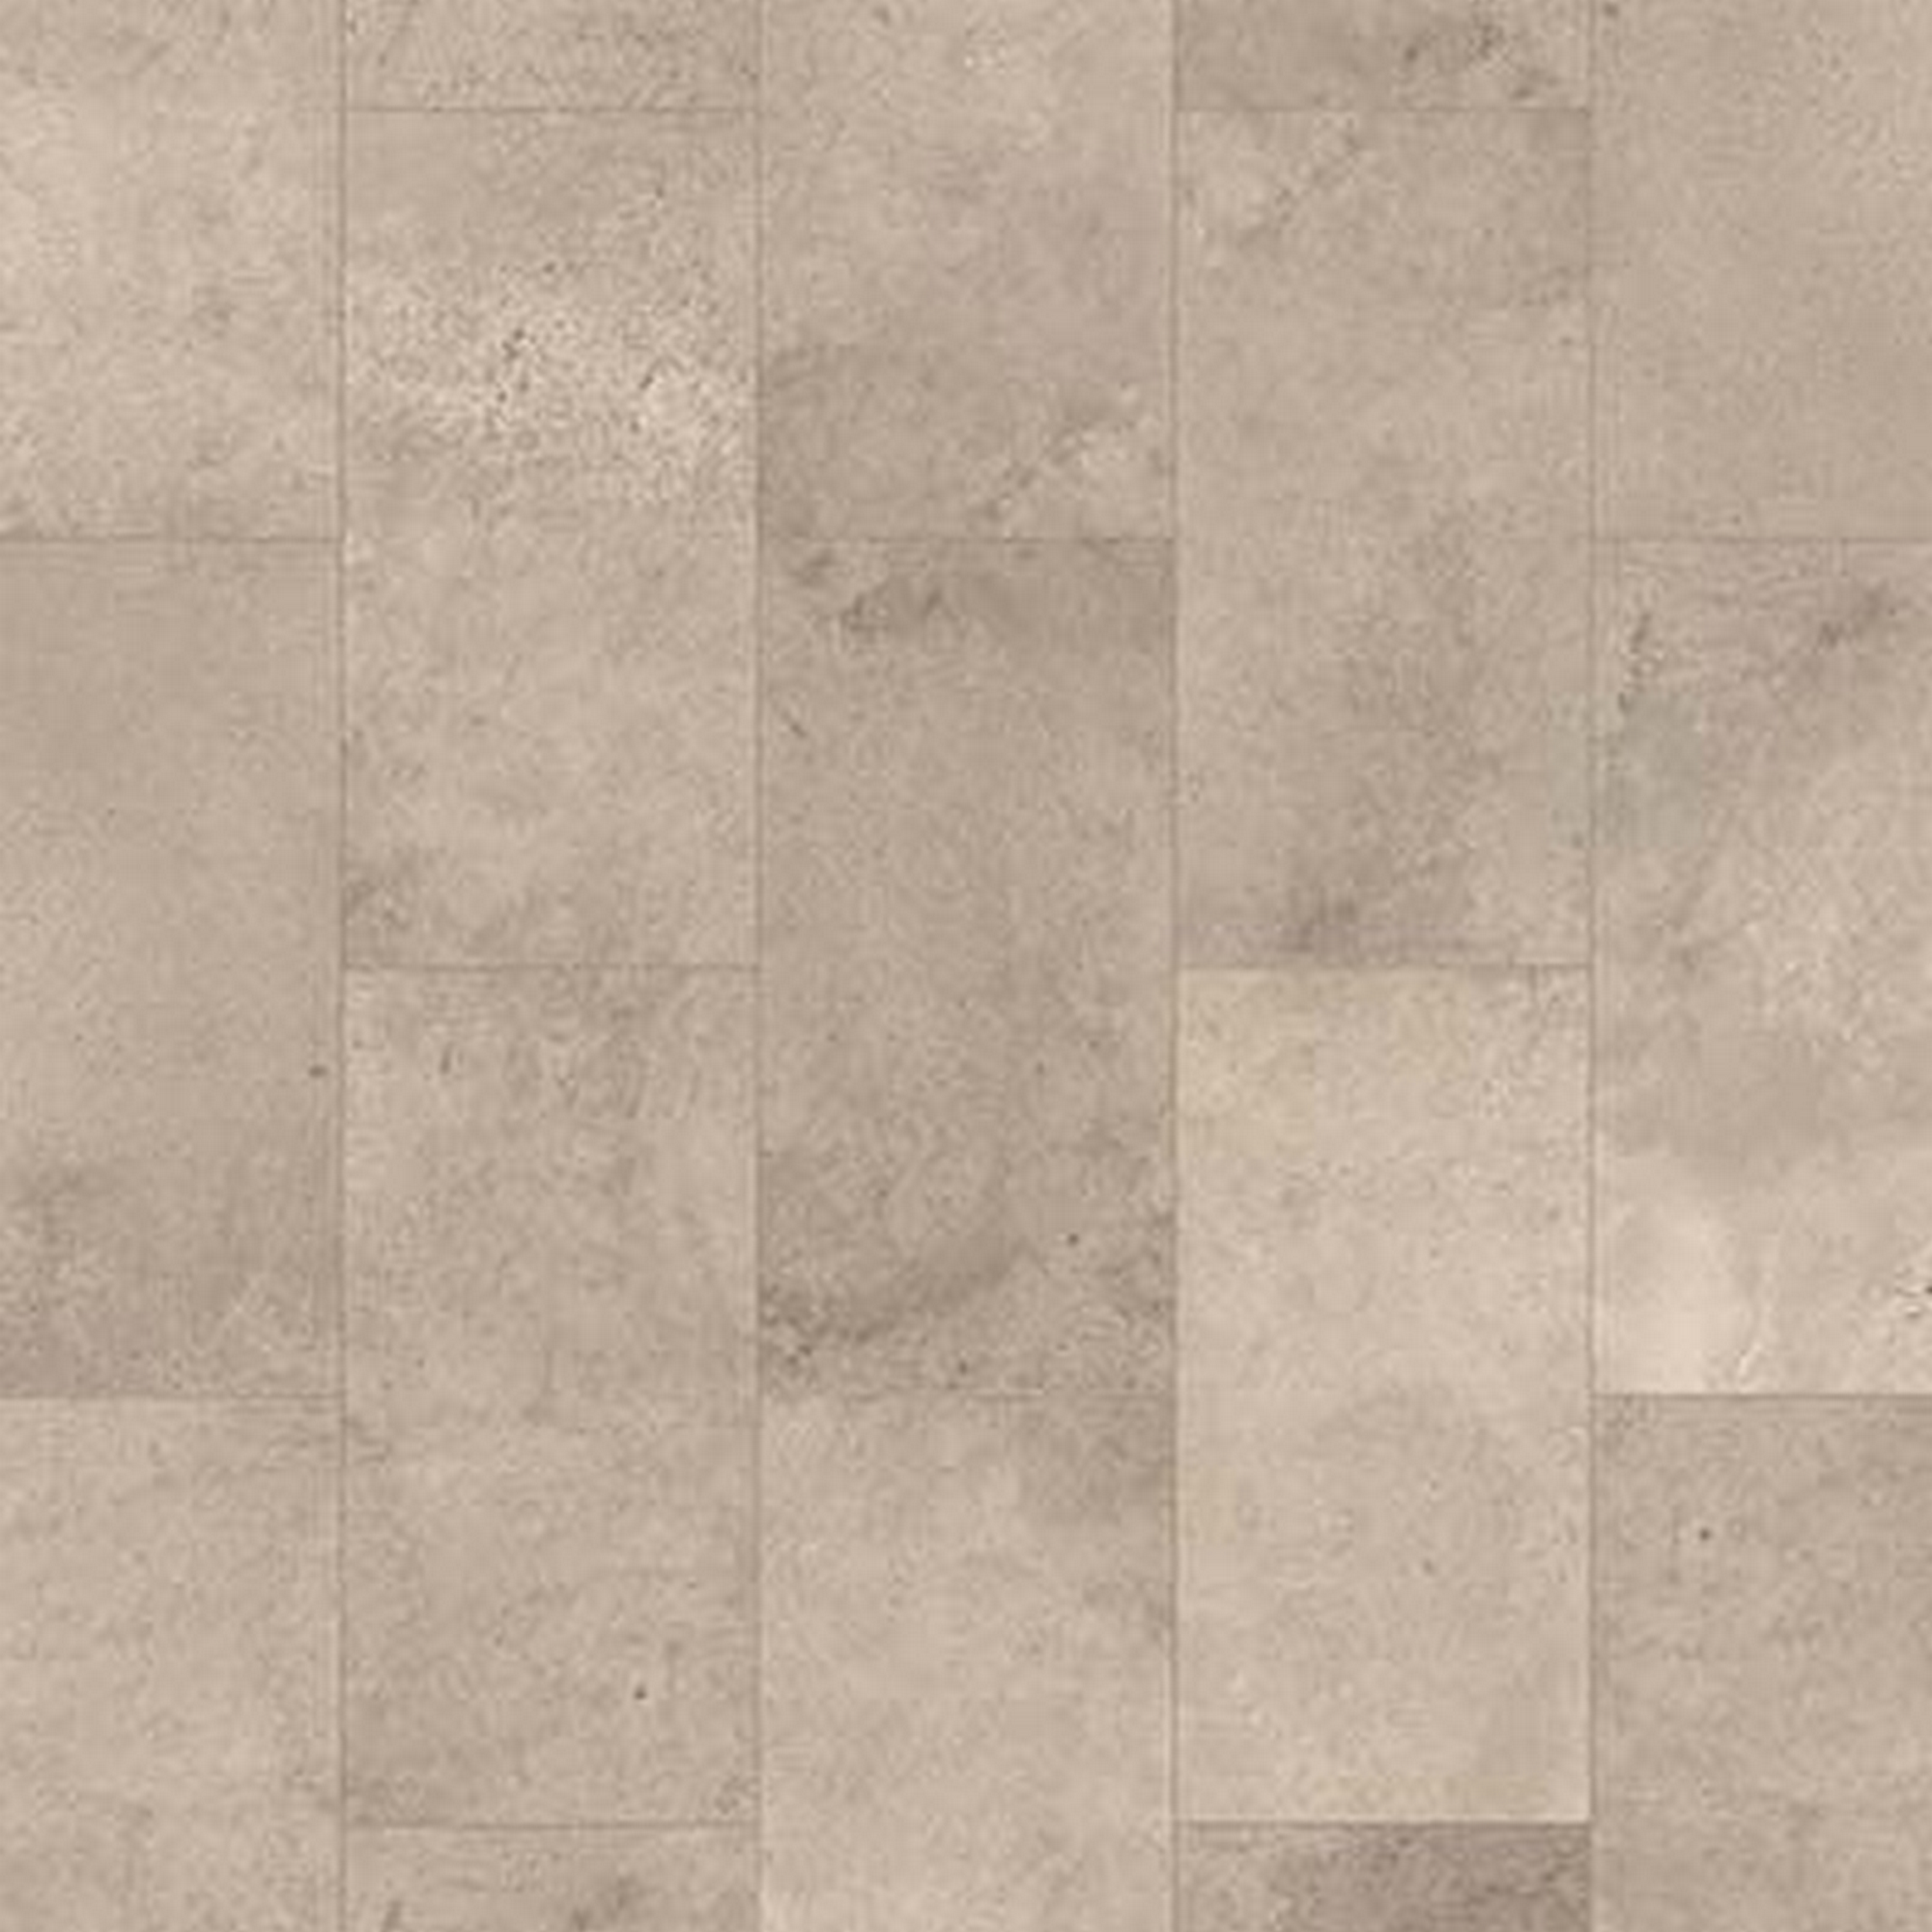 Wand- und Bodenfliese 'NEO Vario' Breccia grau 3,2 mm + product picture